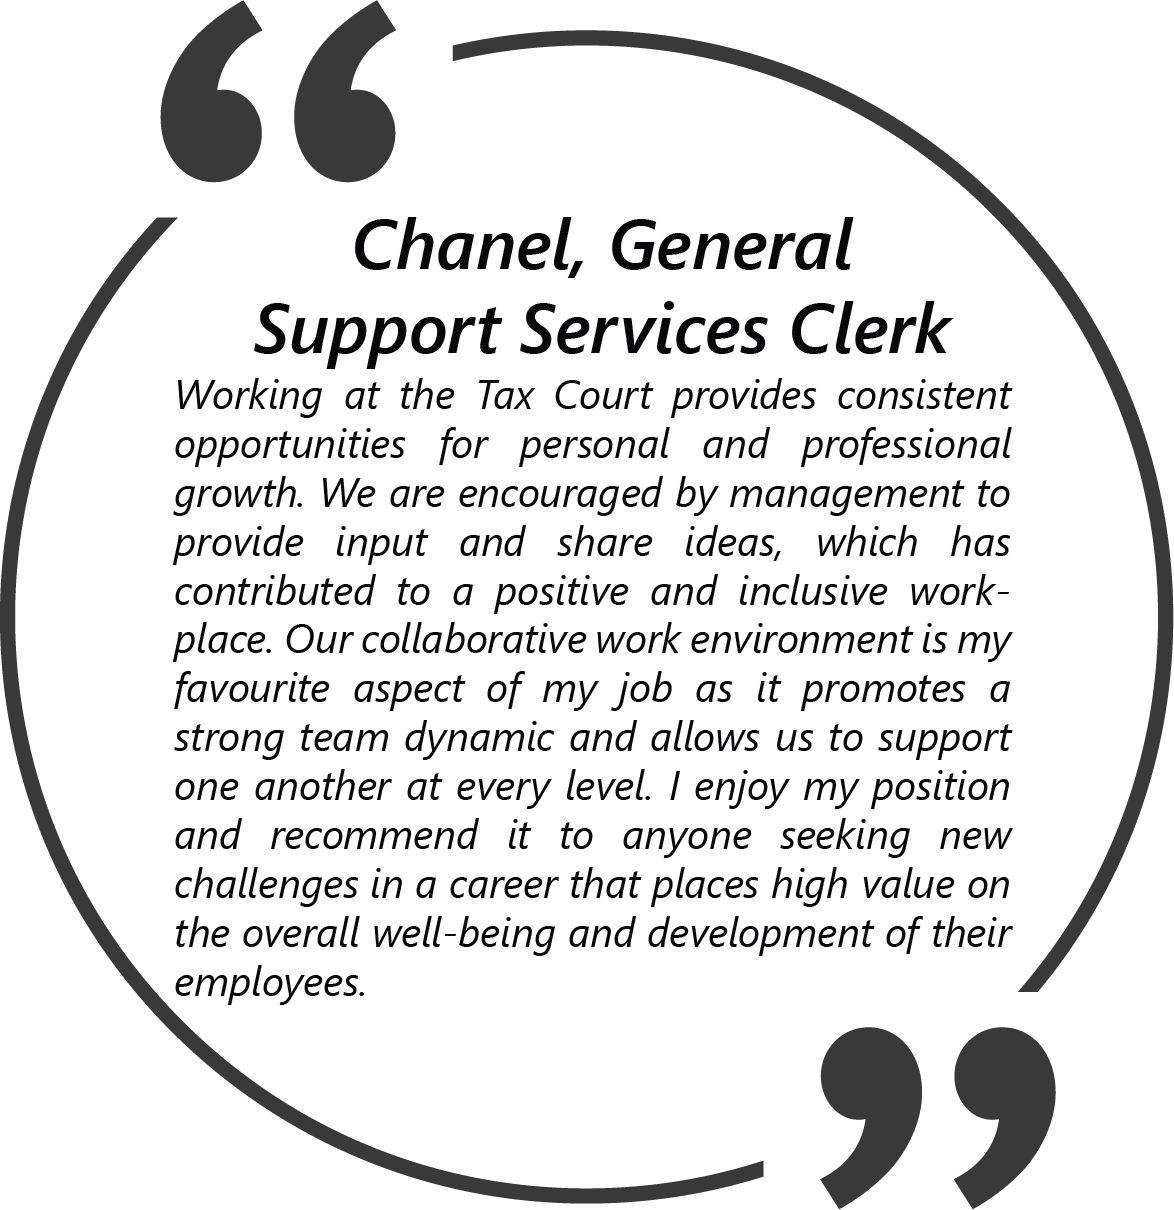 Quote from Chanel, General Support Services Clerk